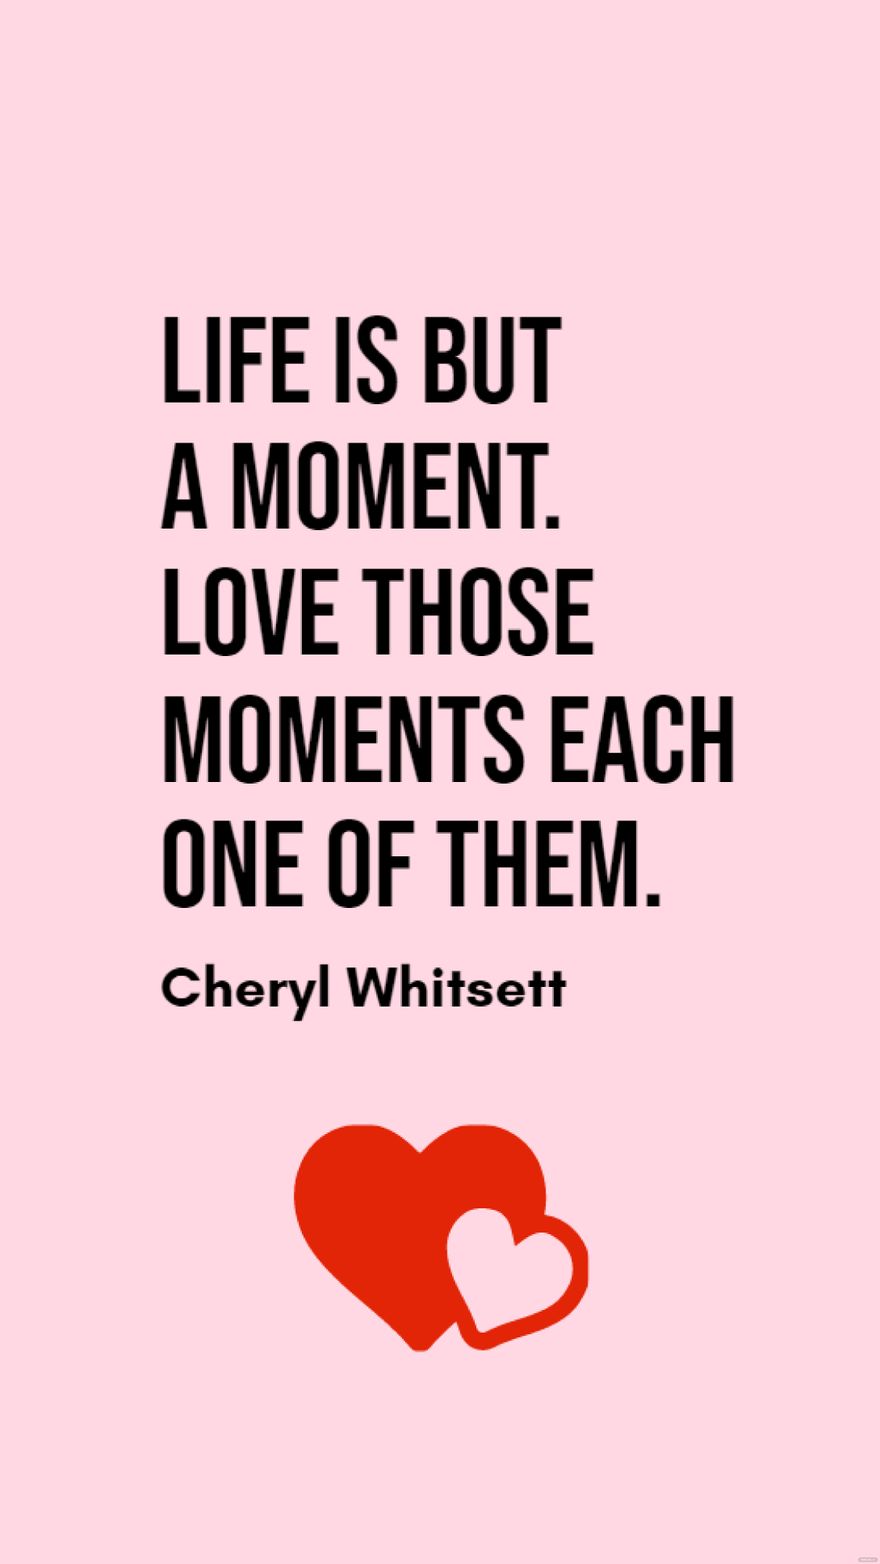 Free Cheryl Whitsett - Life is but a moment. Love those moments each one of them.